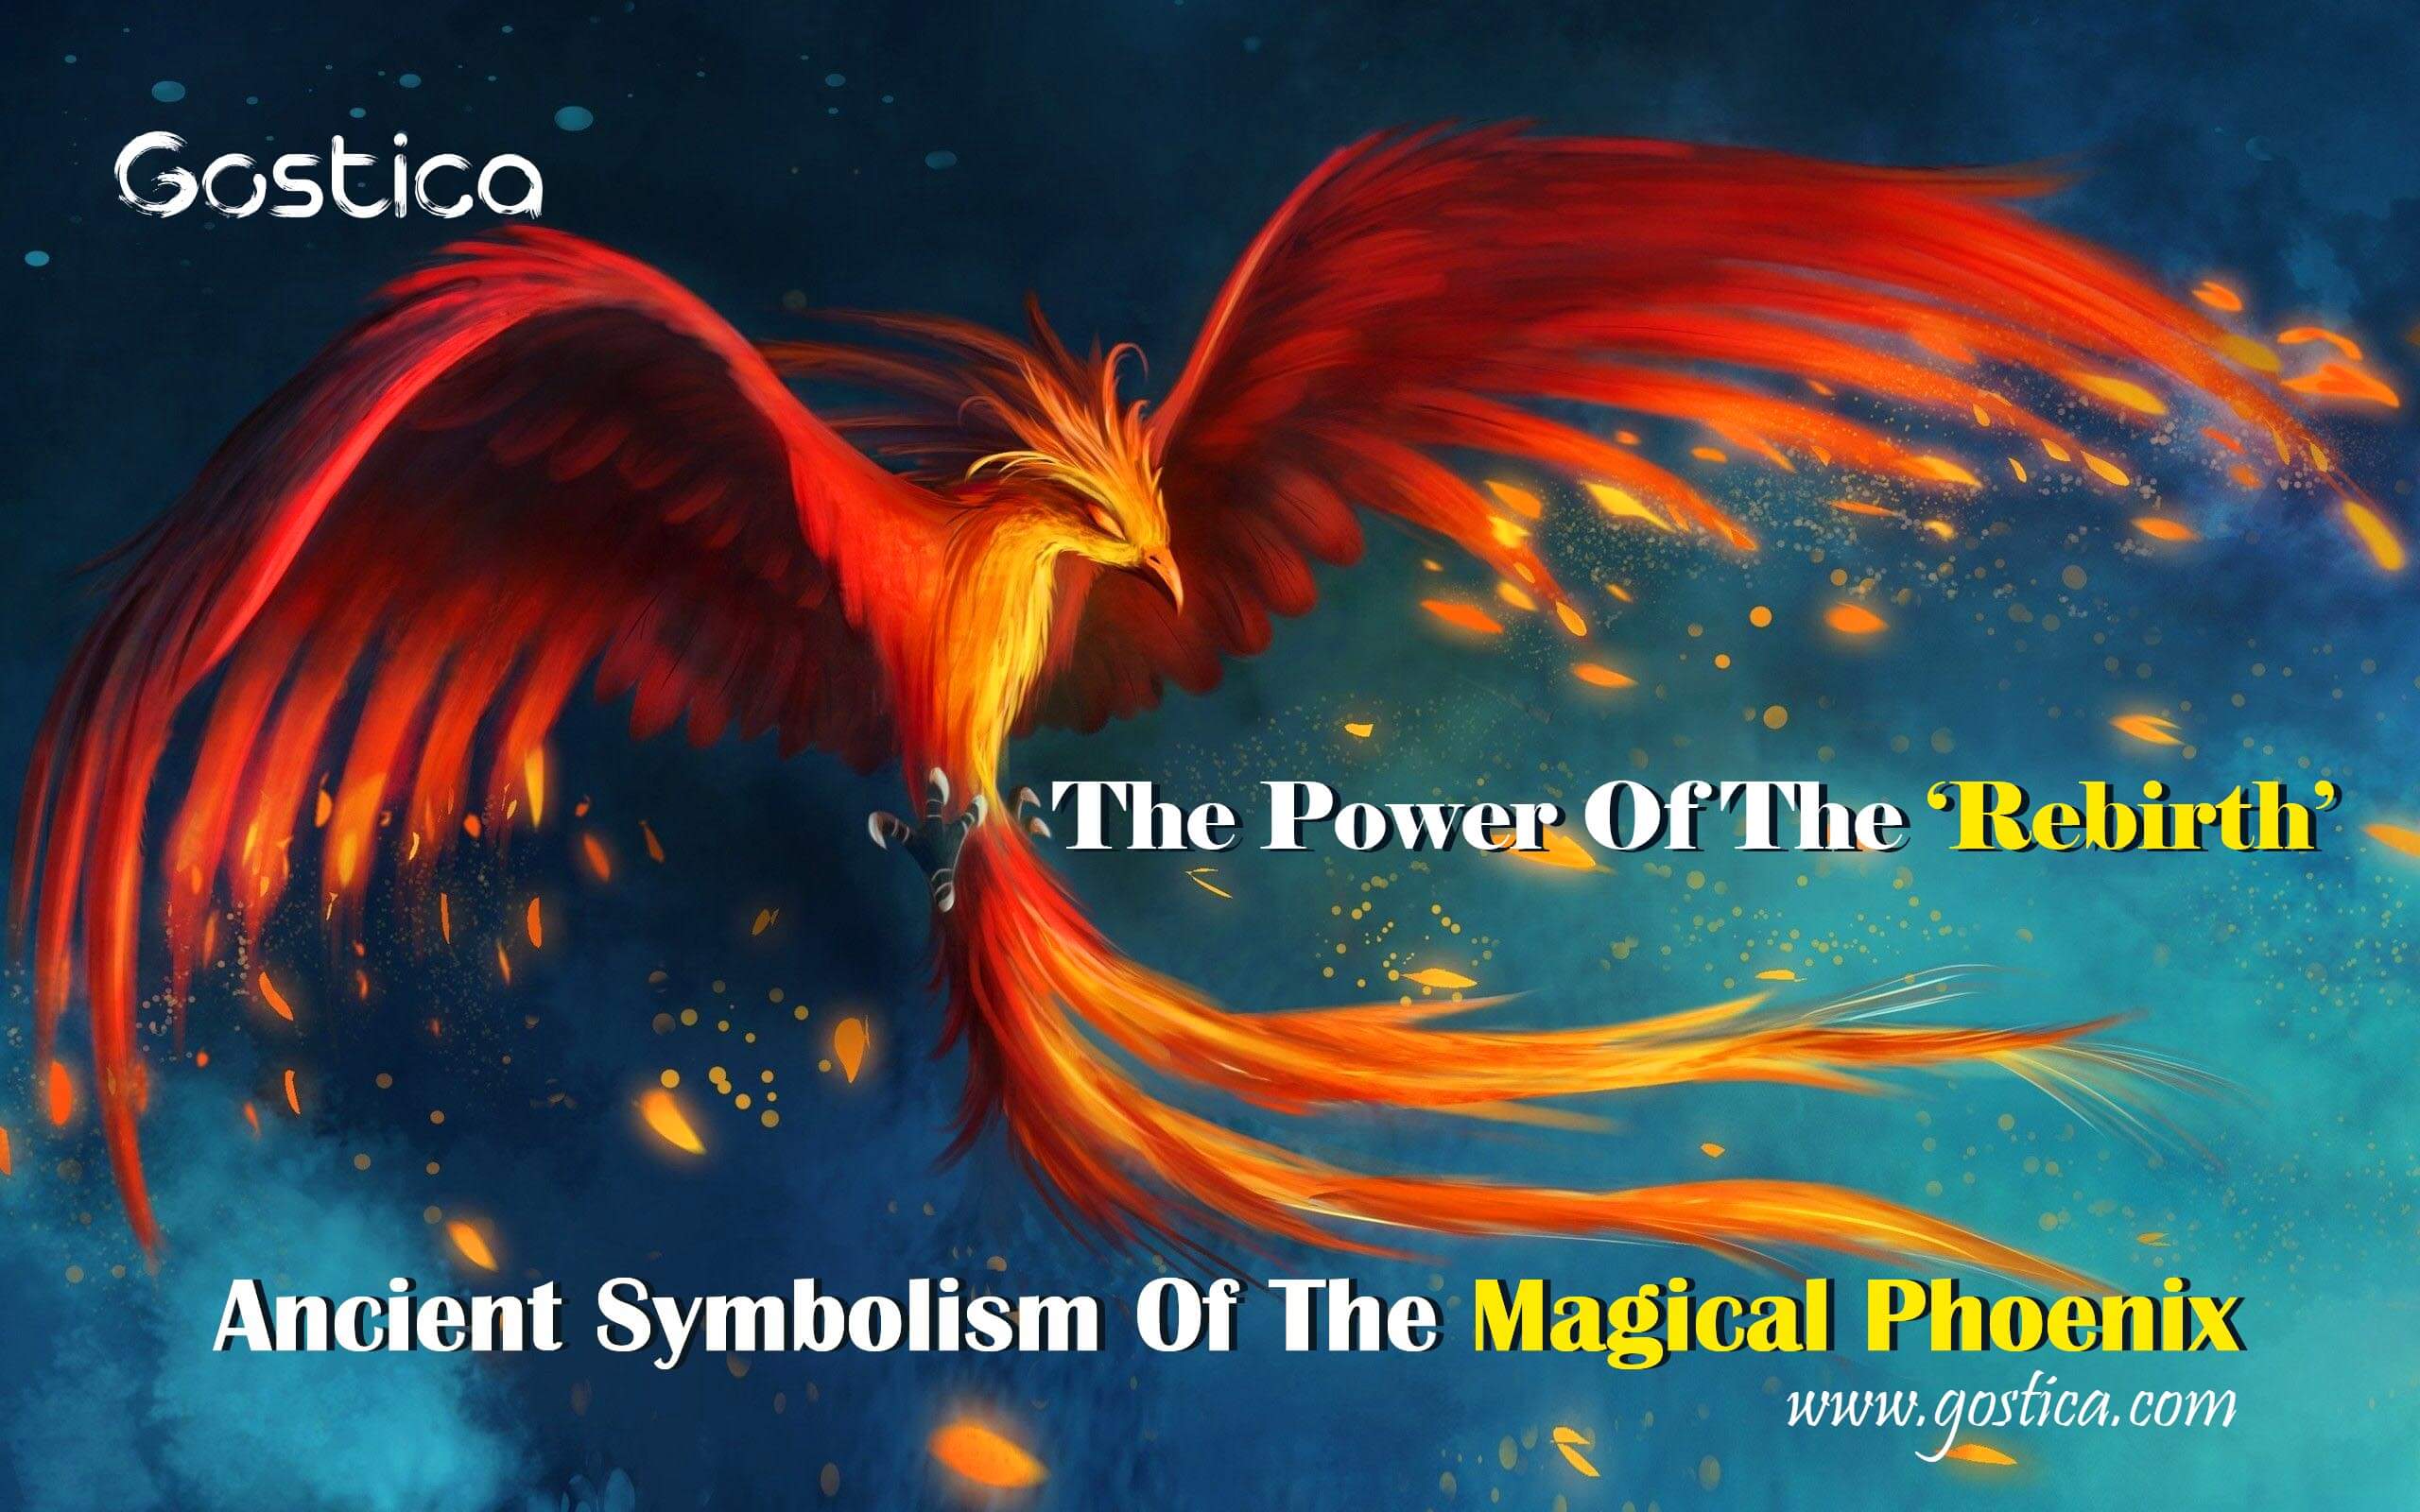 The-Power-Of-The-‘Rebirth’-Ancient-Symbolism-Of-The-Magical-Phoenix-1.jpg